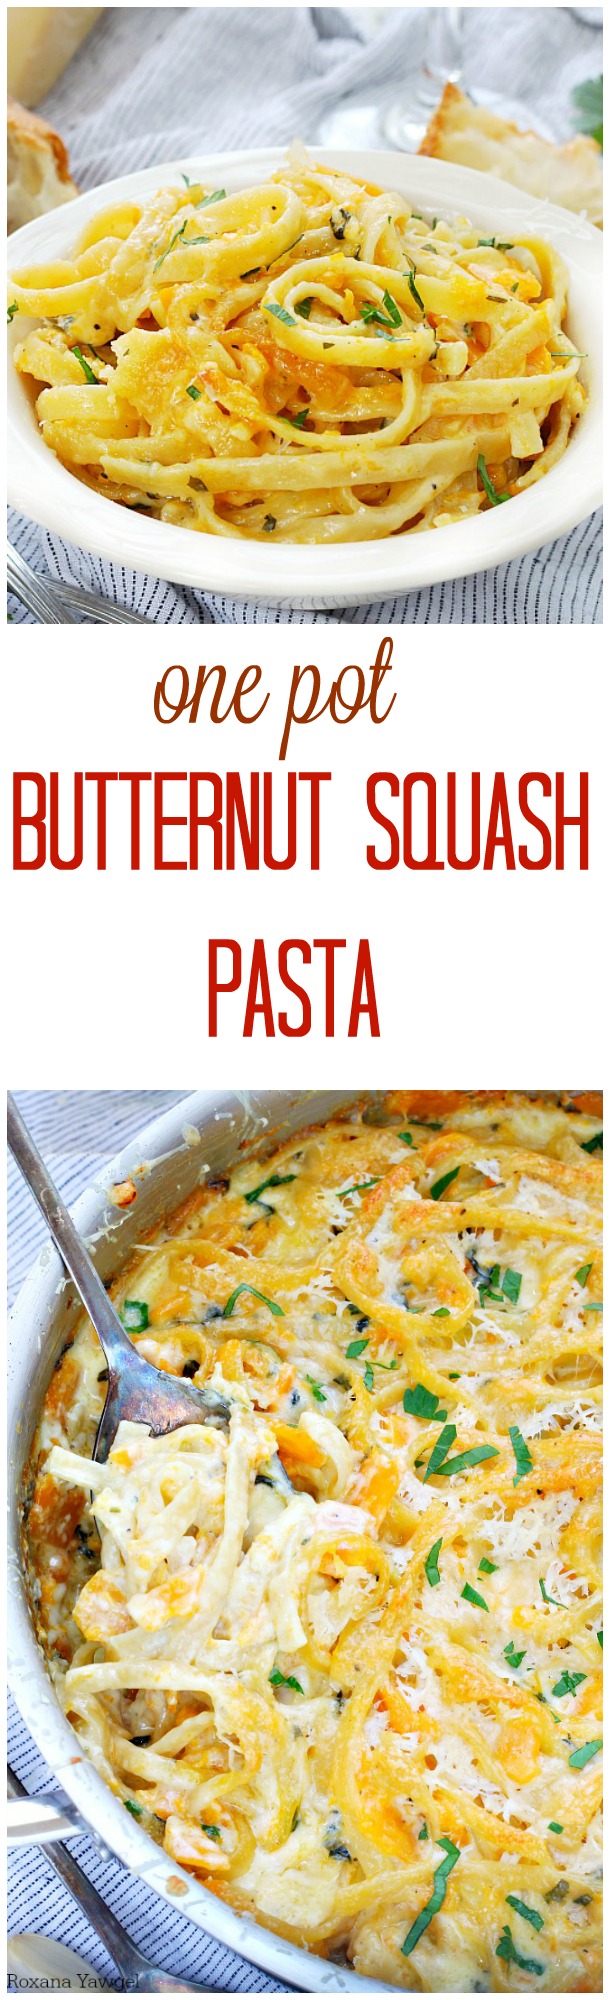 No-fuss creamy butternut squash pasta for those busy nights when you just don't have the time. Easy peasy with only one pan to clean up!